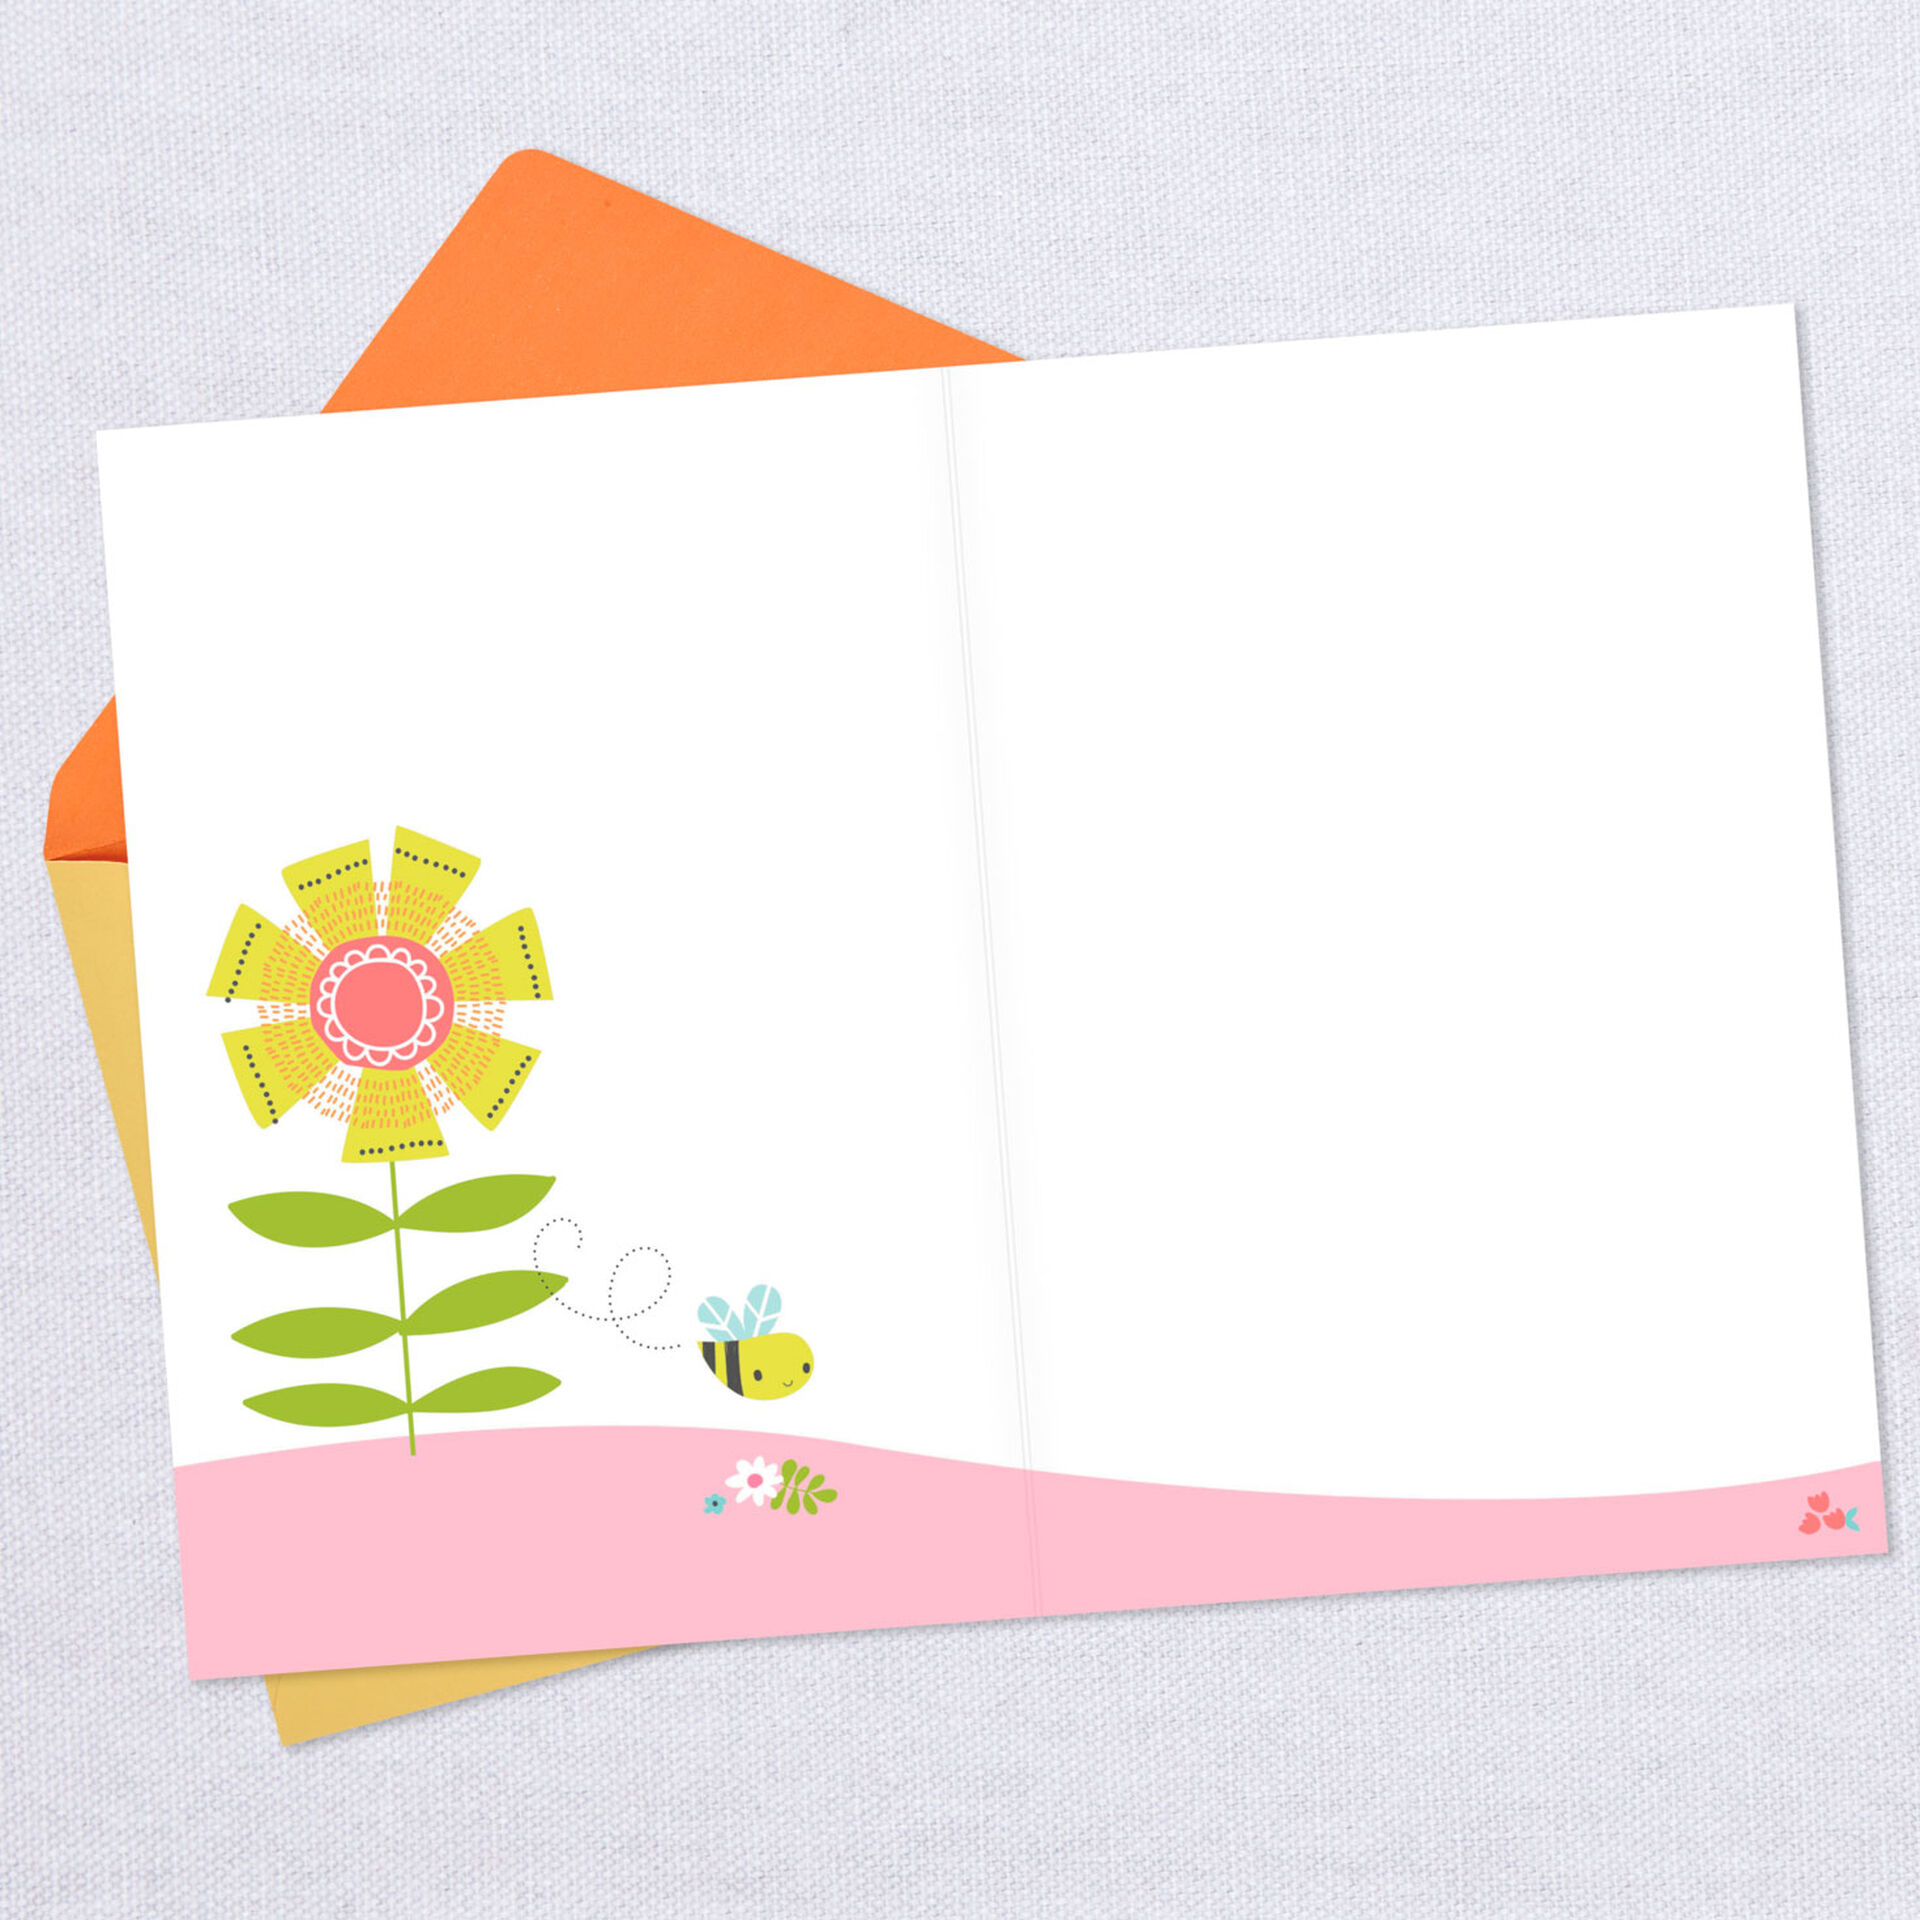 Flowers-and-Bees-Blank-Card_299IMP1744_02